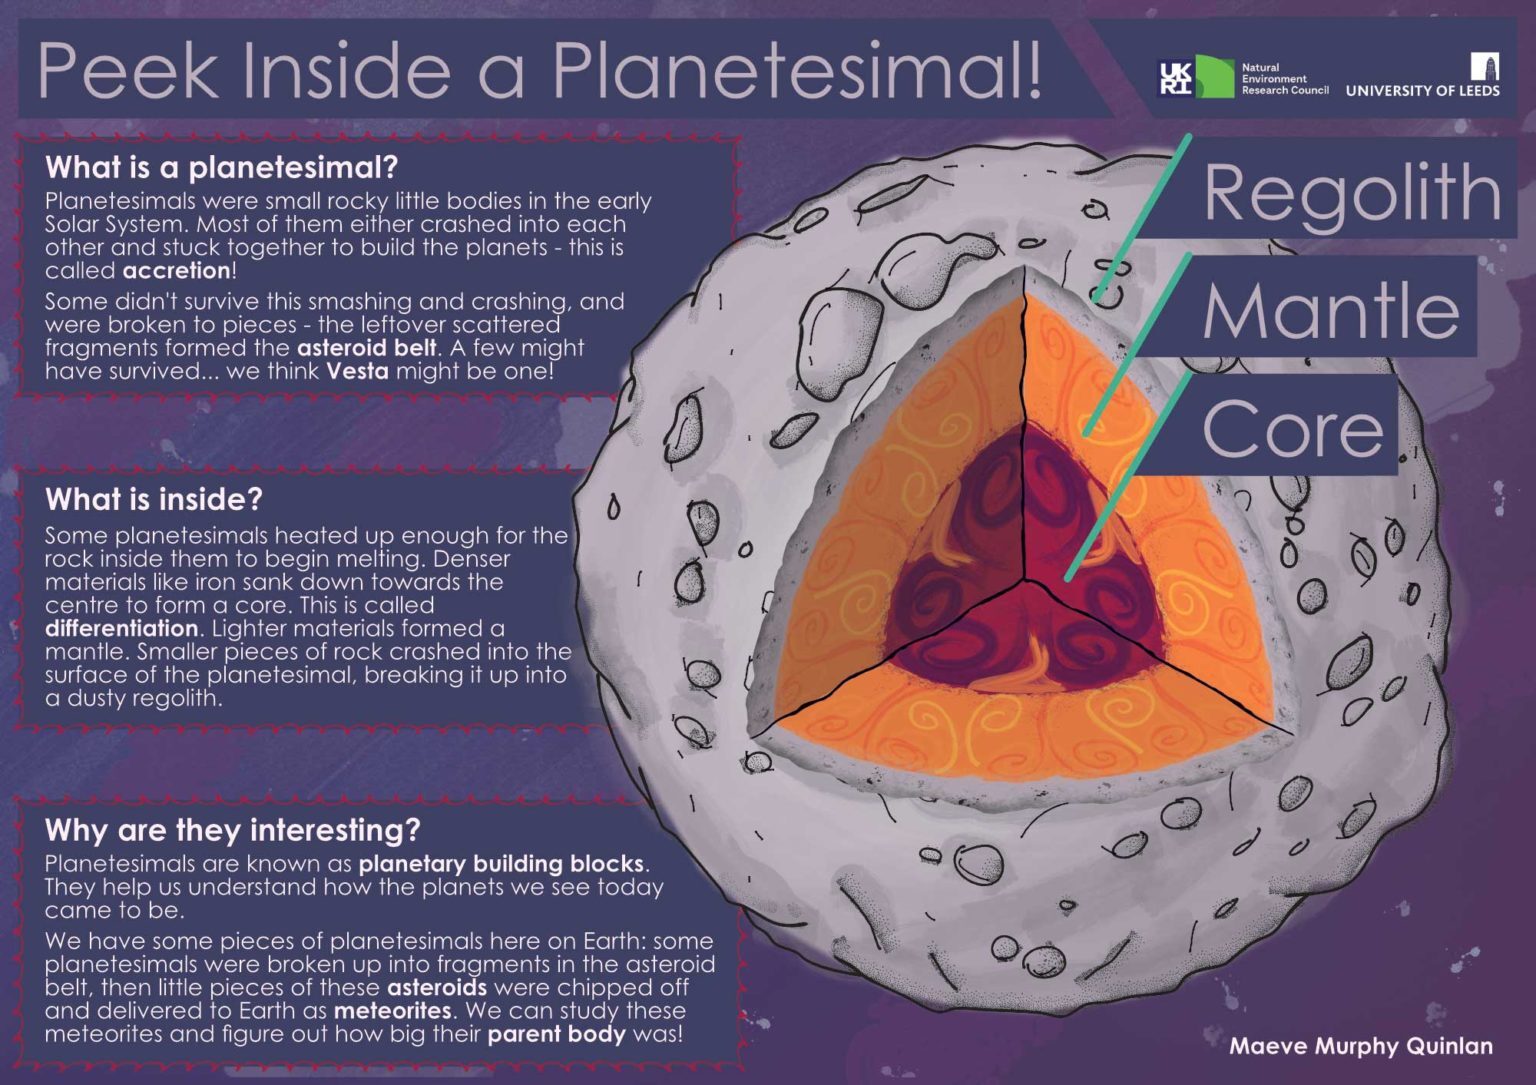 Peek inside a planetesimal infographic by Maeve Murphy Quinlan